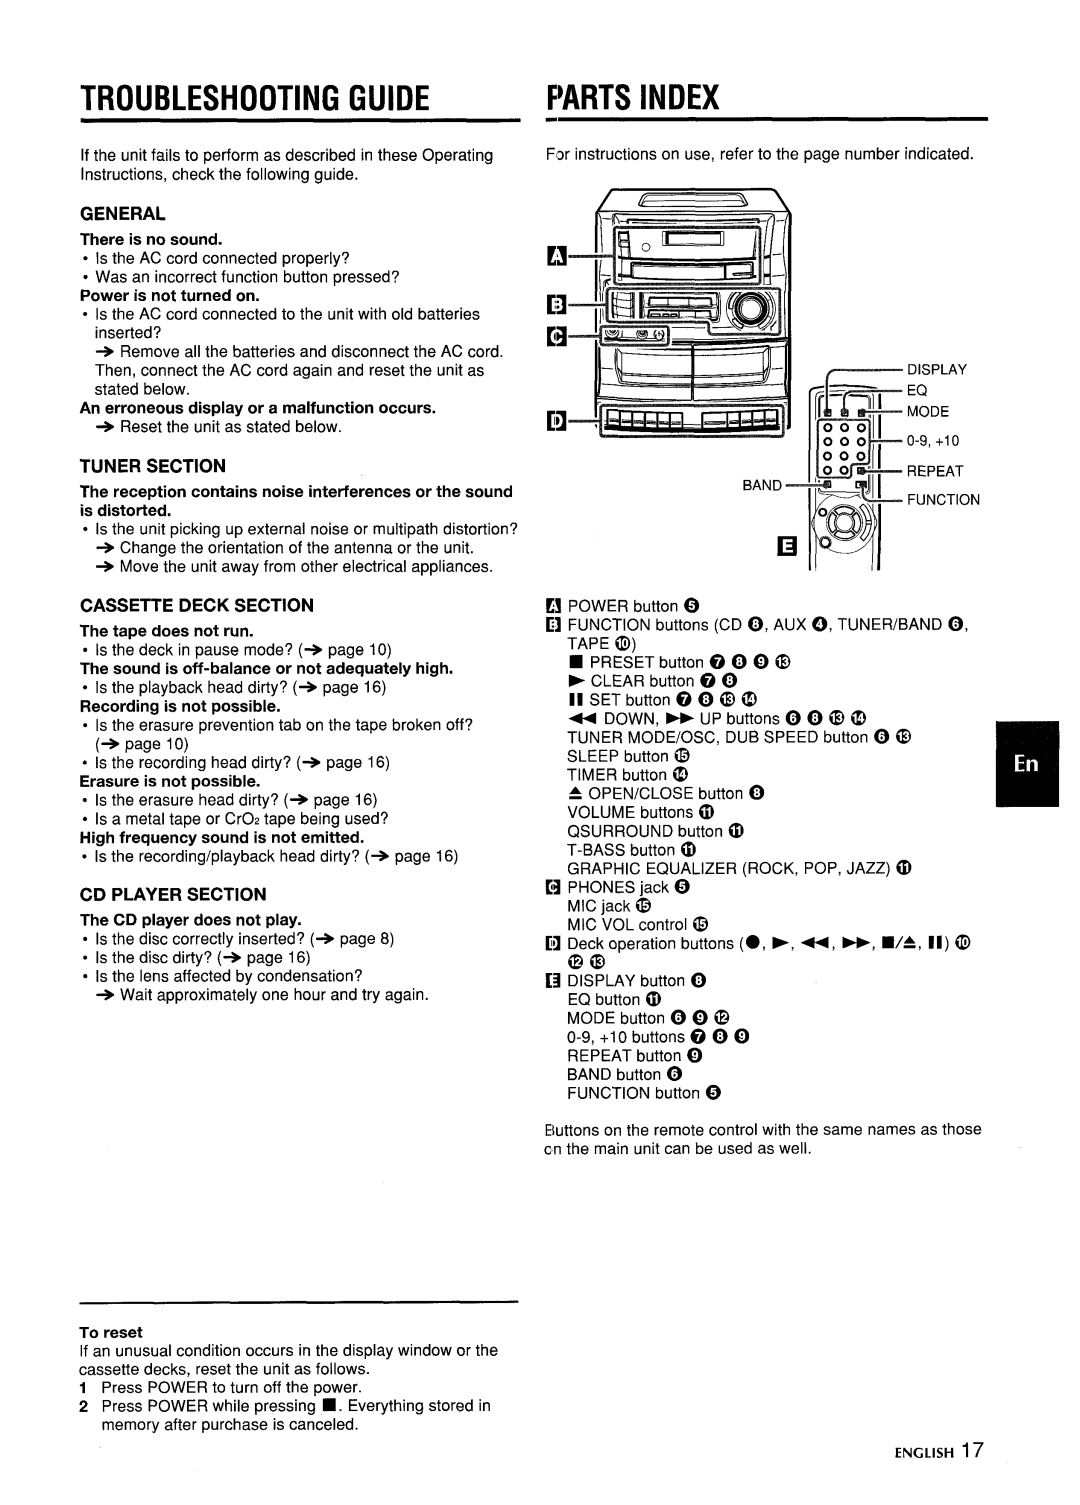 Aiwa CA-DW635 manual Troubleshooting Guide, F~Arts Index, GENERAL There is no sound, Tuner Section, Cassette Deck Section 